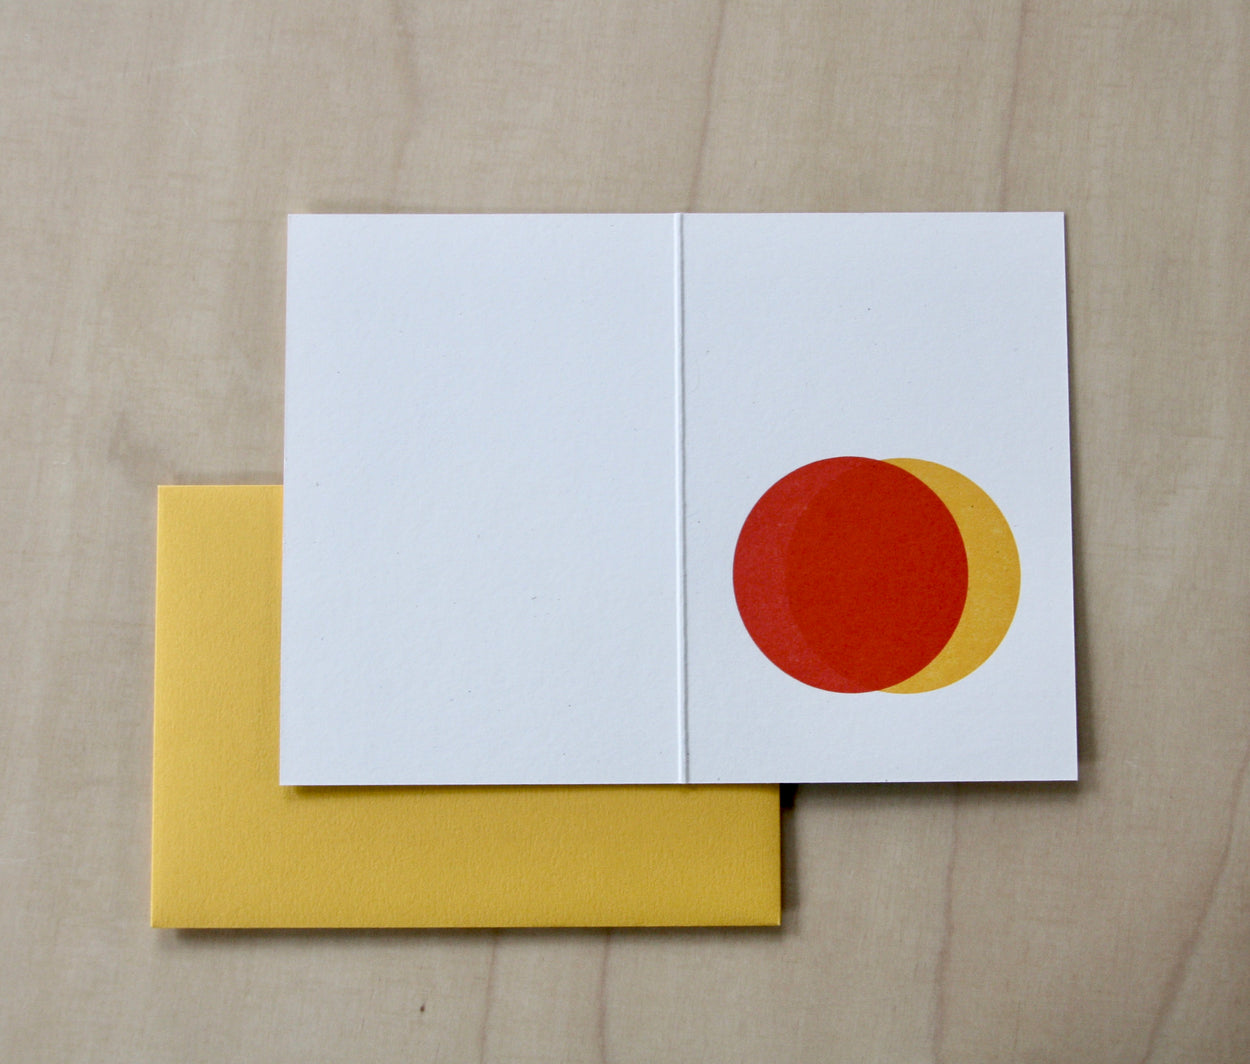 Inside of Hand printed greeting card with yellow and red overlapping suns with a yellow envelope. reading "Three things cannot be long hidden, the sun, the moon and the truth" Buddha